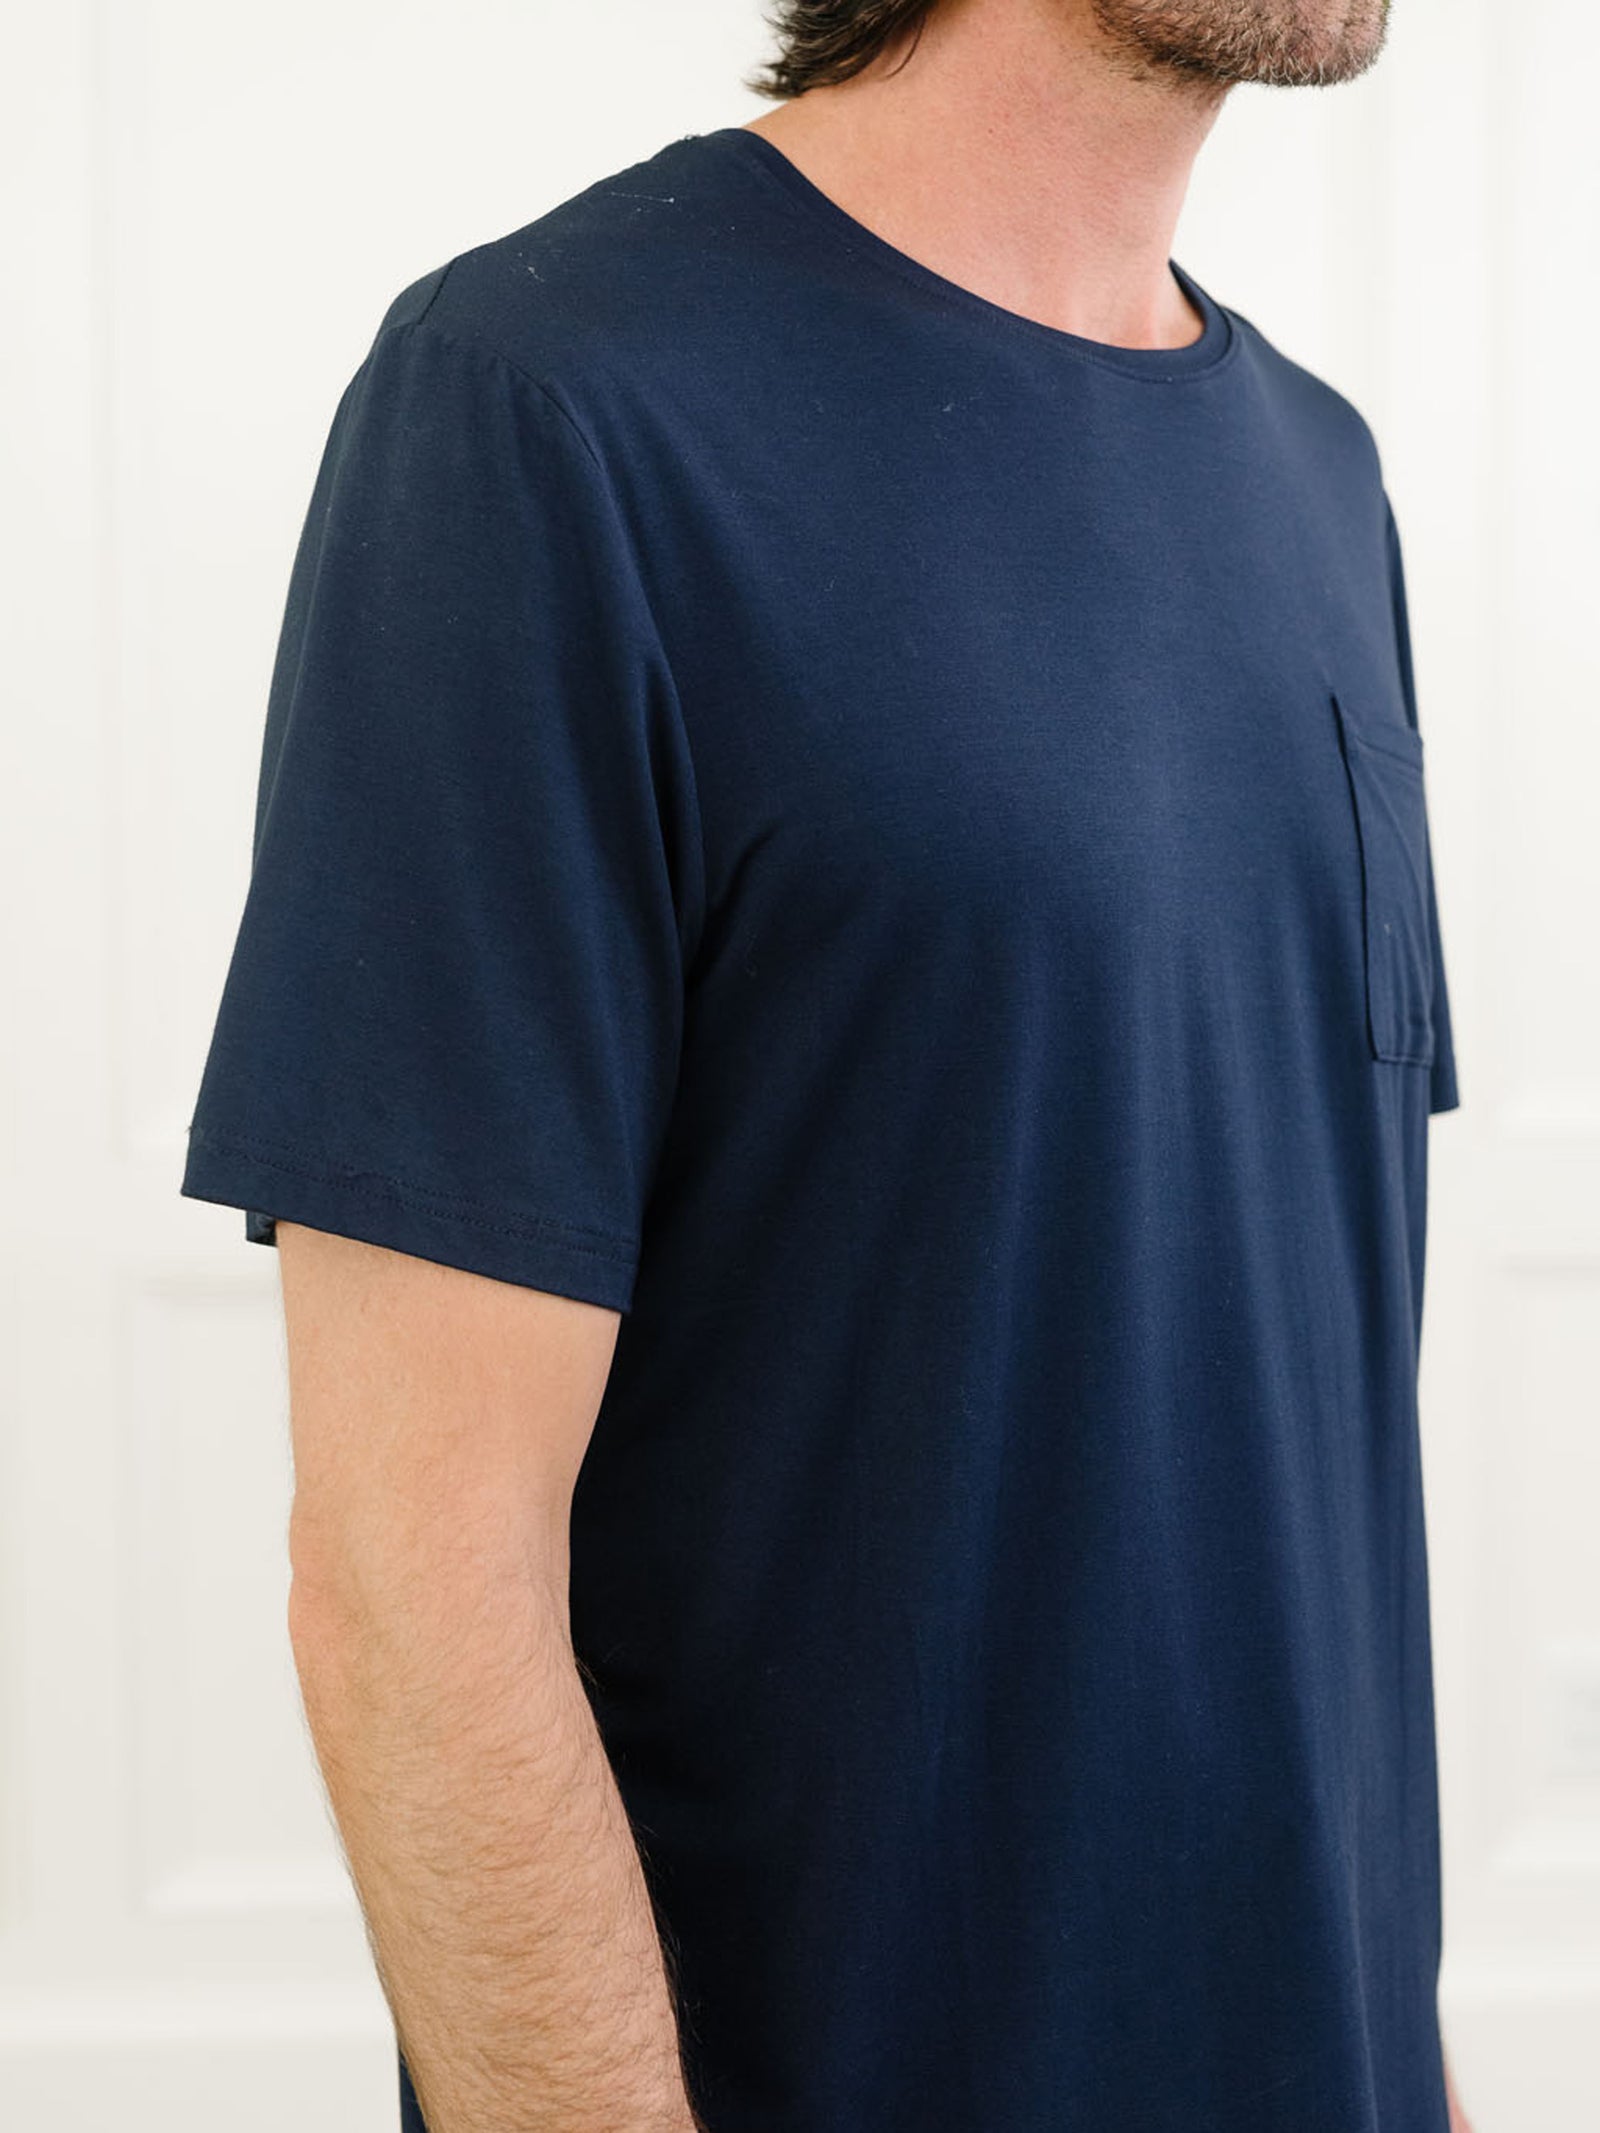 Navy Men's Stretch-Knit Bamboo Lounge Tee. A man is wearing the lounge tee in a well lit home.